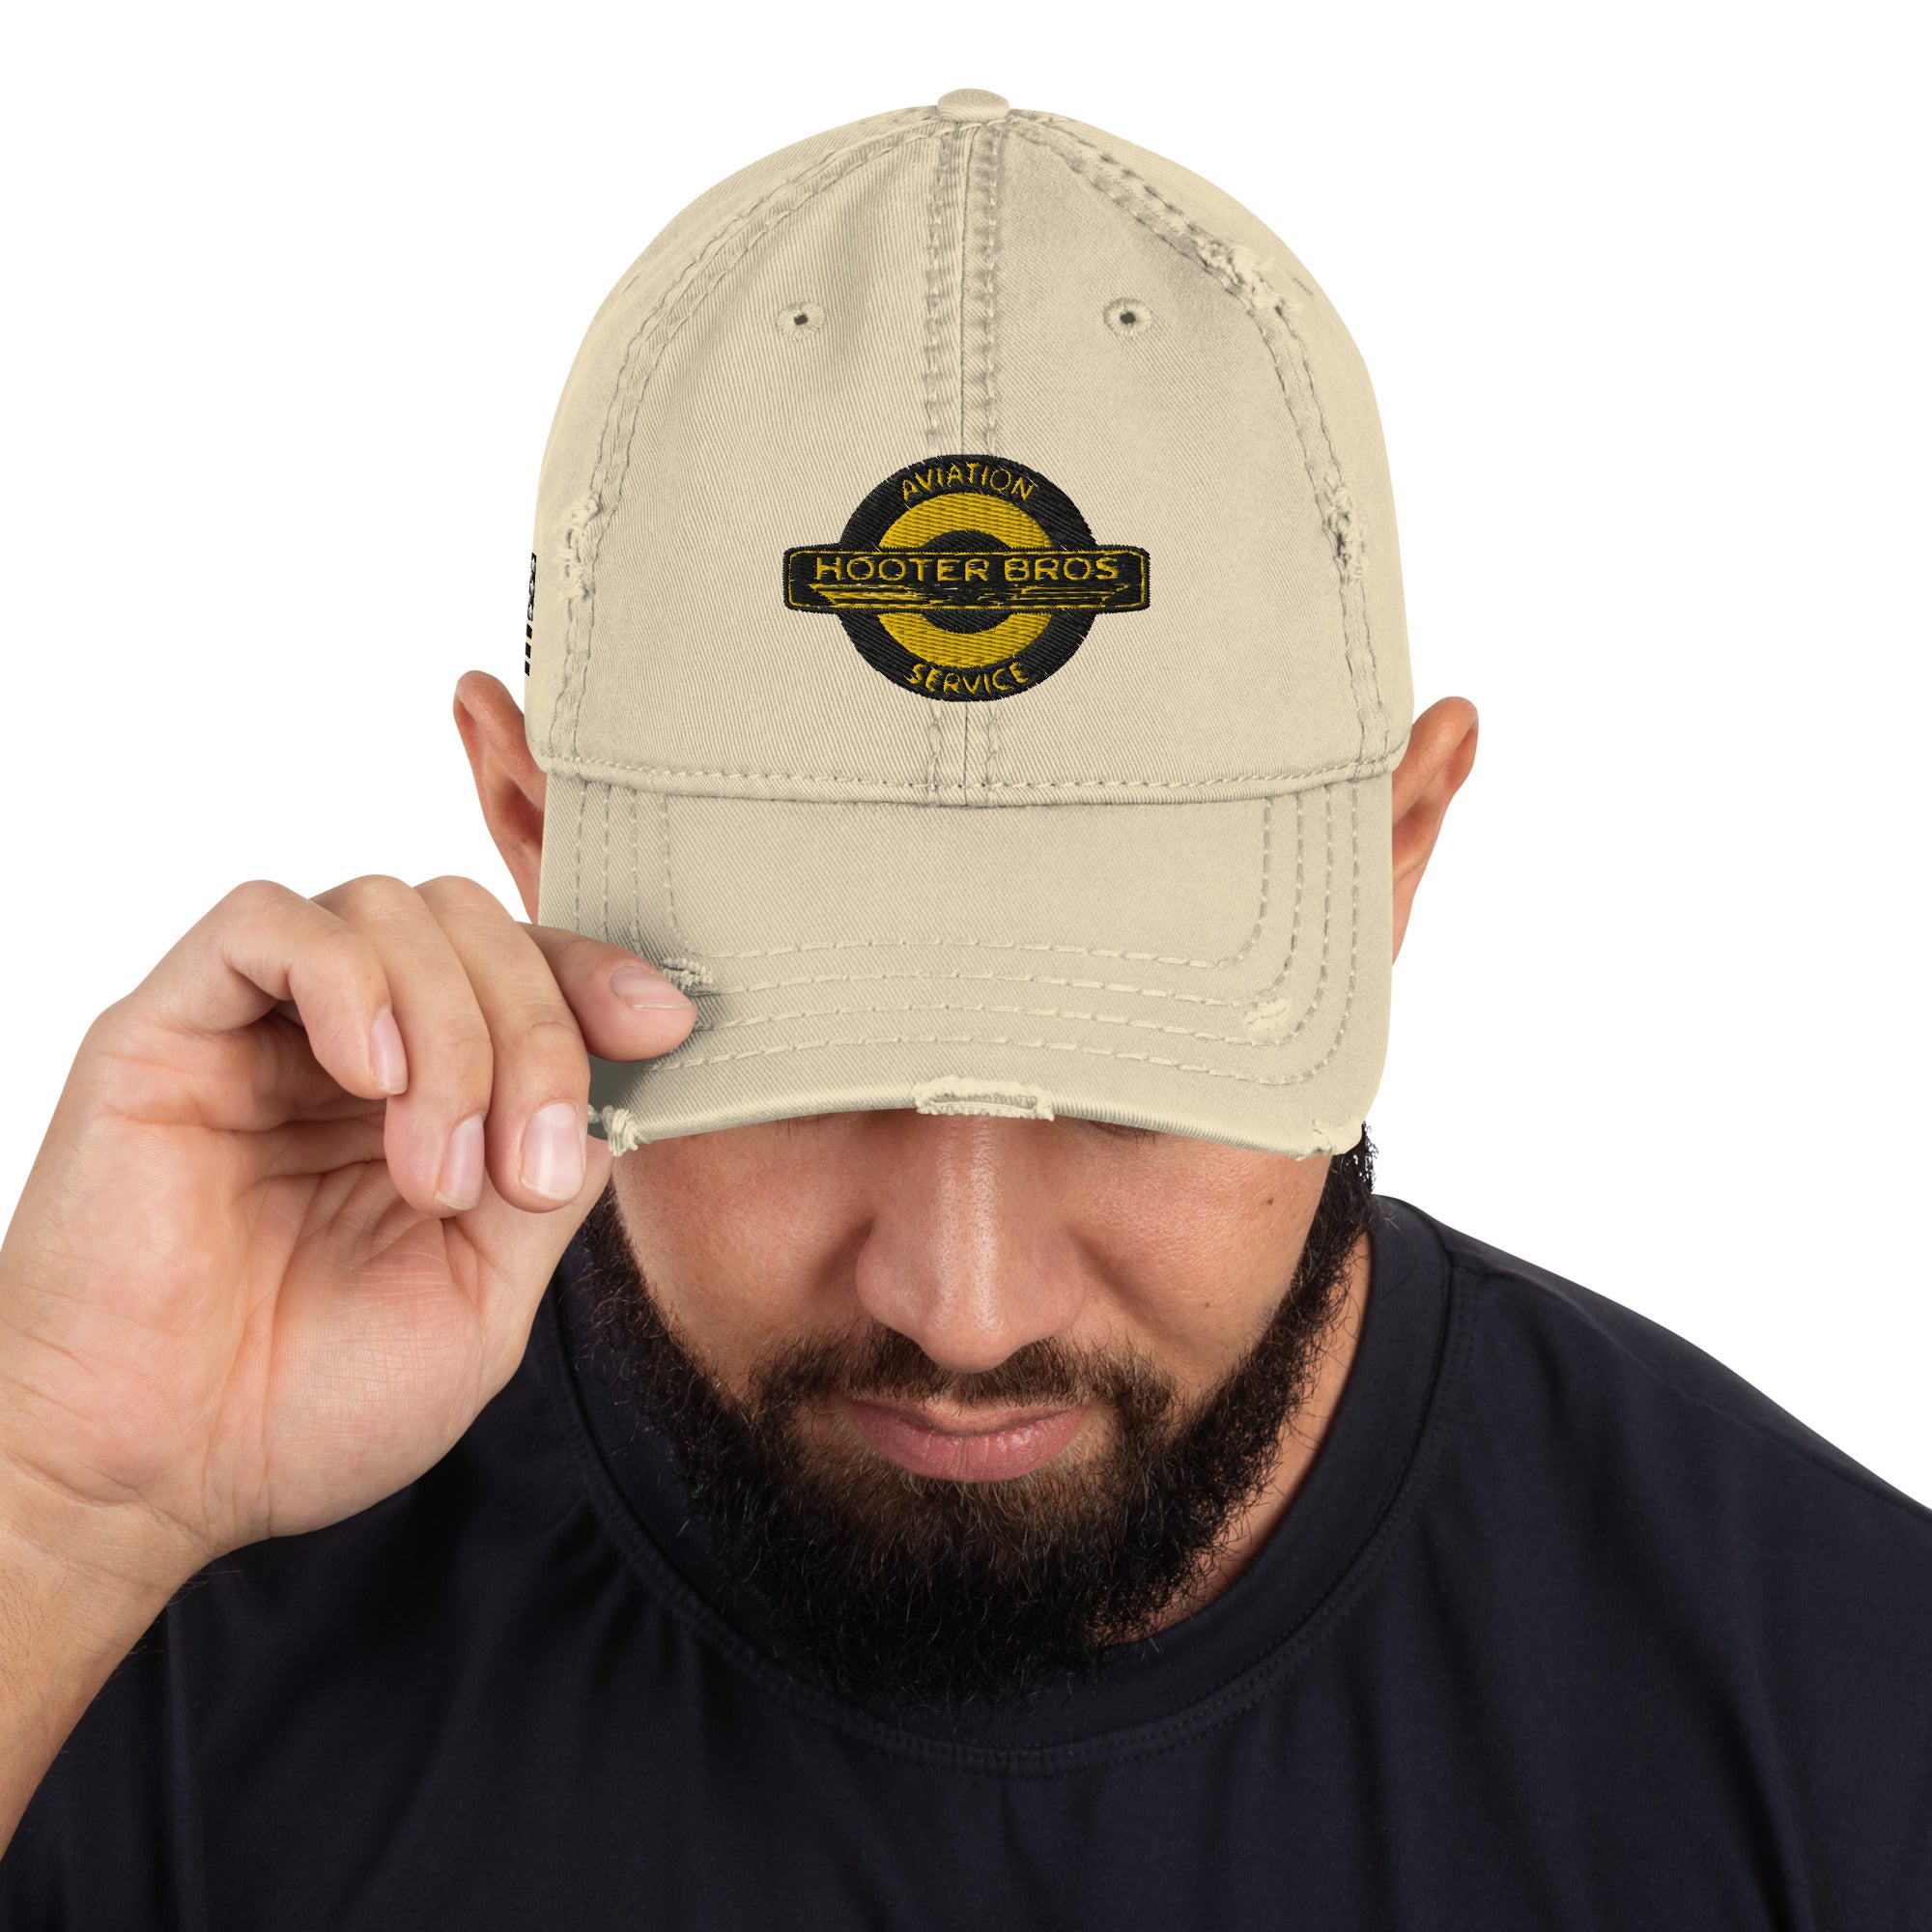 Hooter Bros Aviation Service Embroidered Distressed Dad Hat by Ruck & Rotor